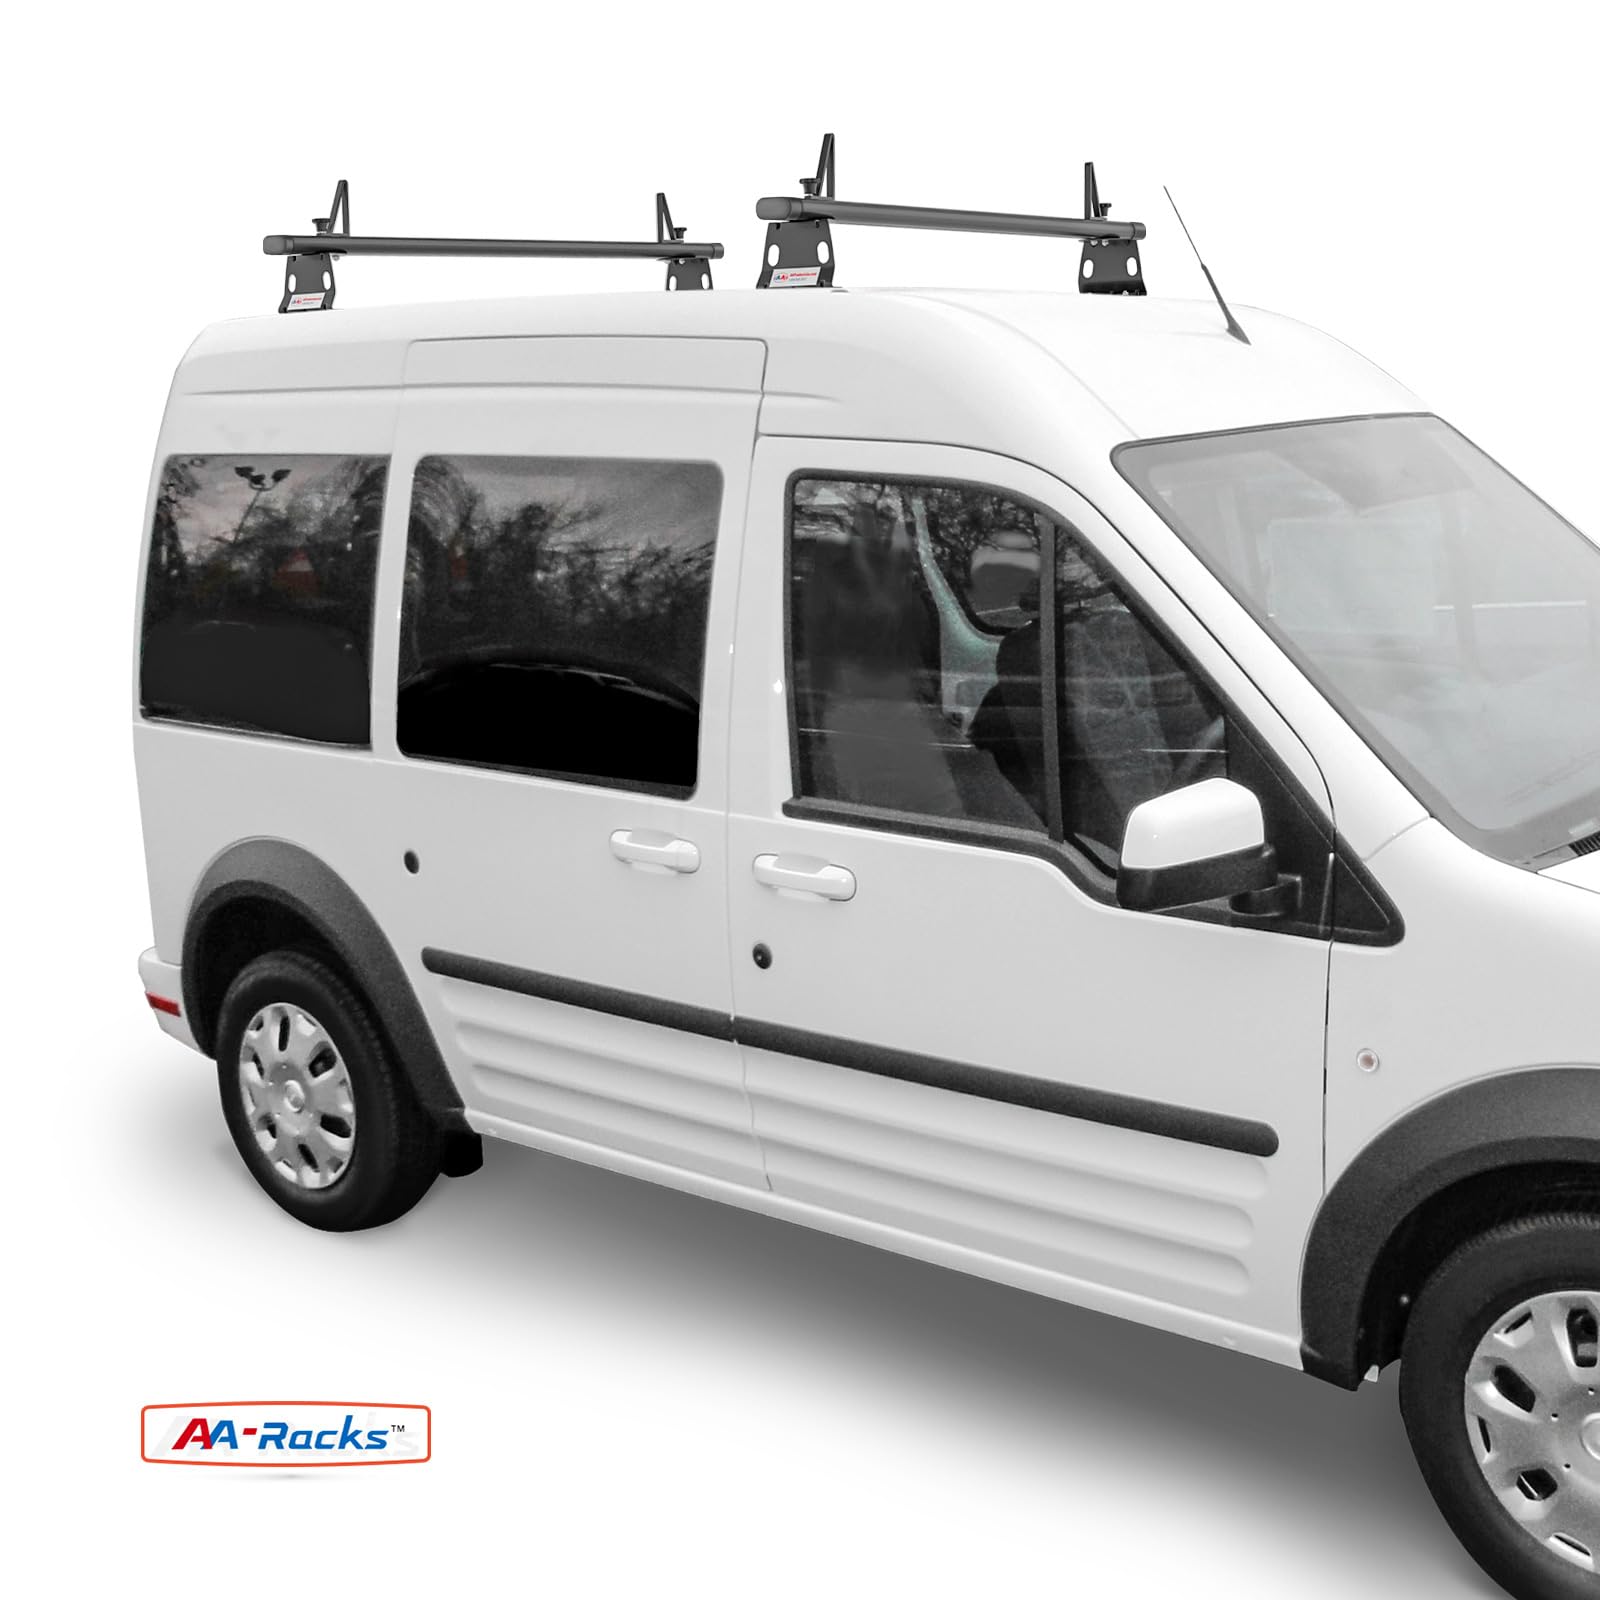 AA-Racks Model ADX32-TR Compatible Ford Transit Connect 2008-13 Aluminum 2 Bar (60") Utility Drilling Van Roof Rack System with Ladder Stopper Sandy Black